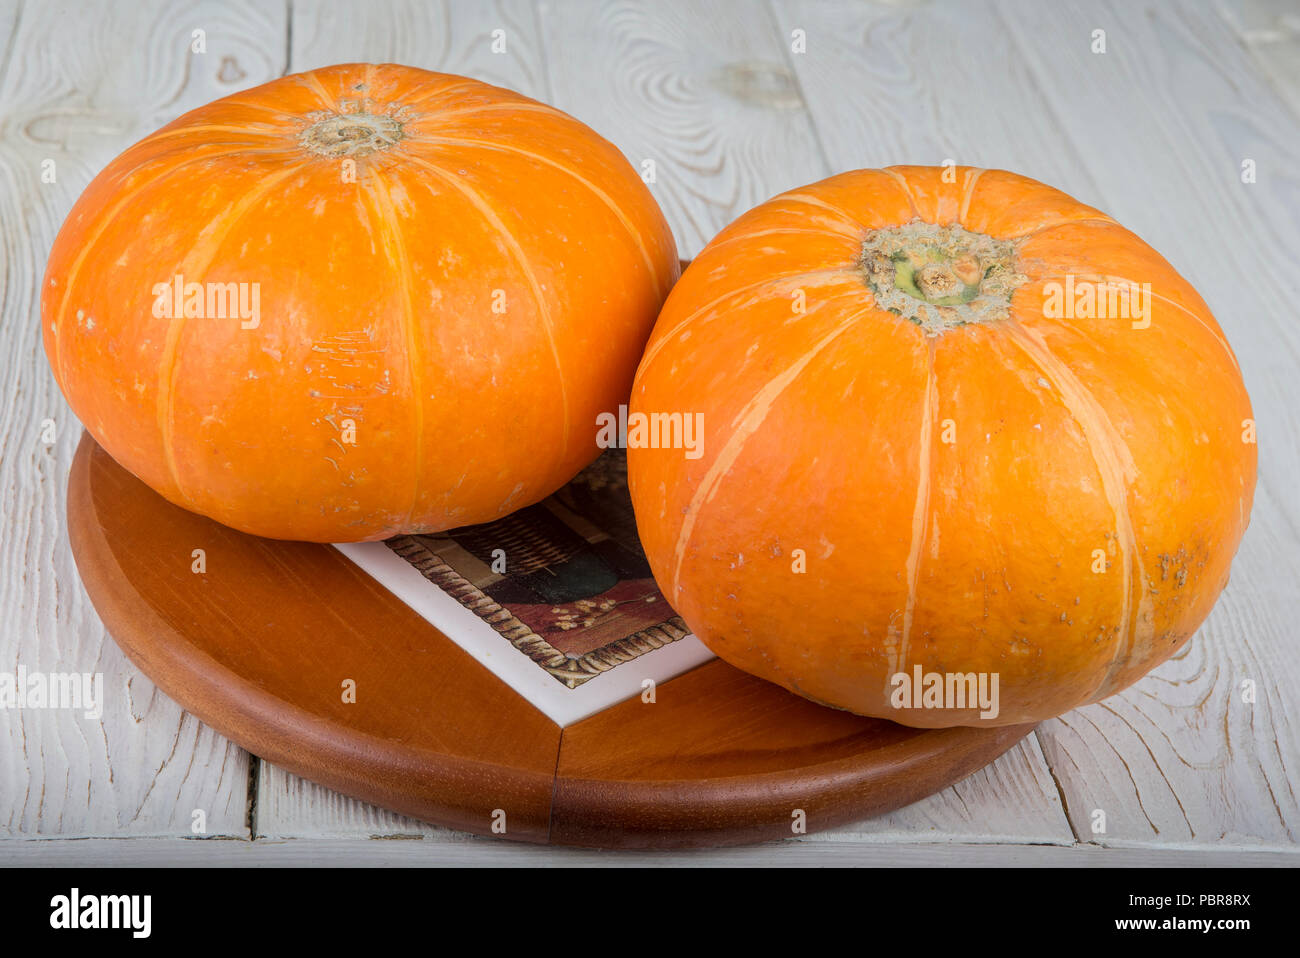 Ripe fresh pumpkin. On a wooden table Stock Photo